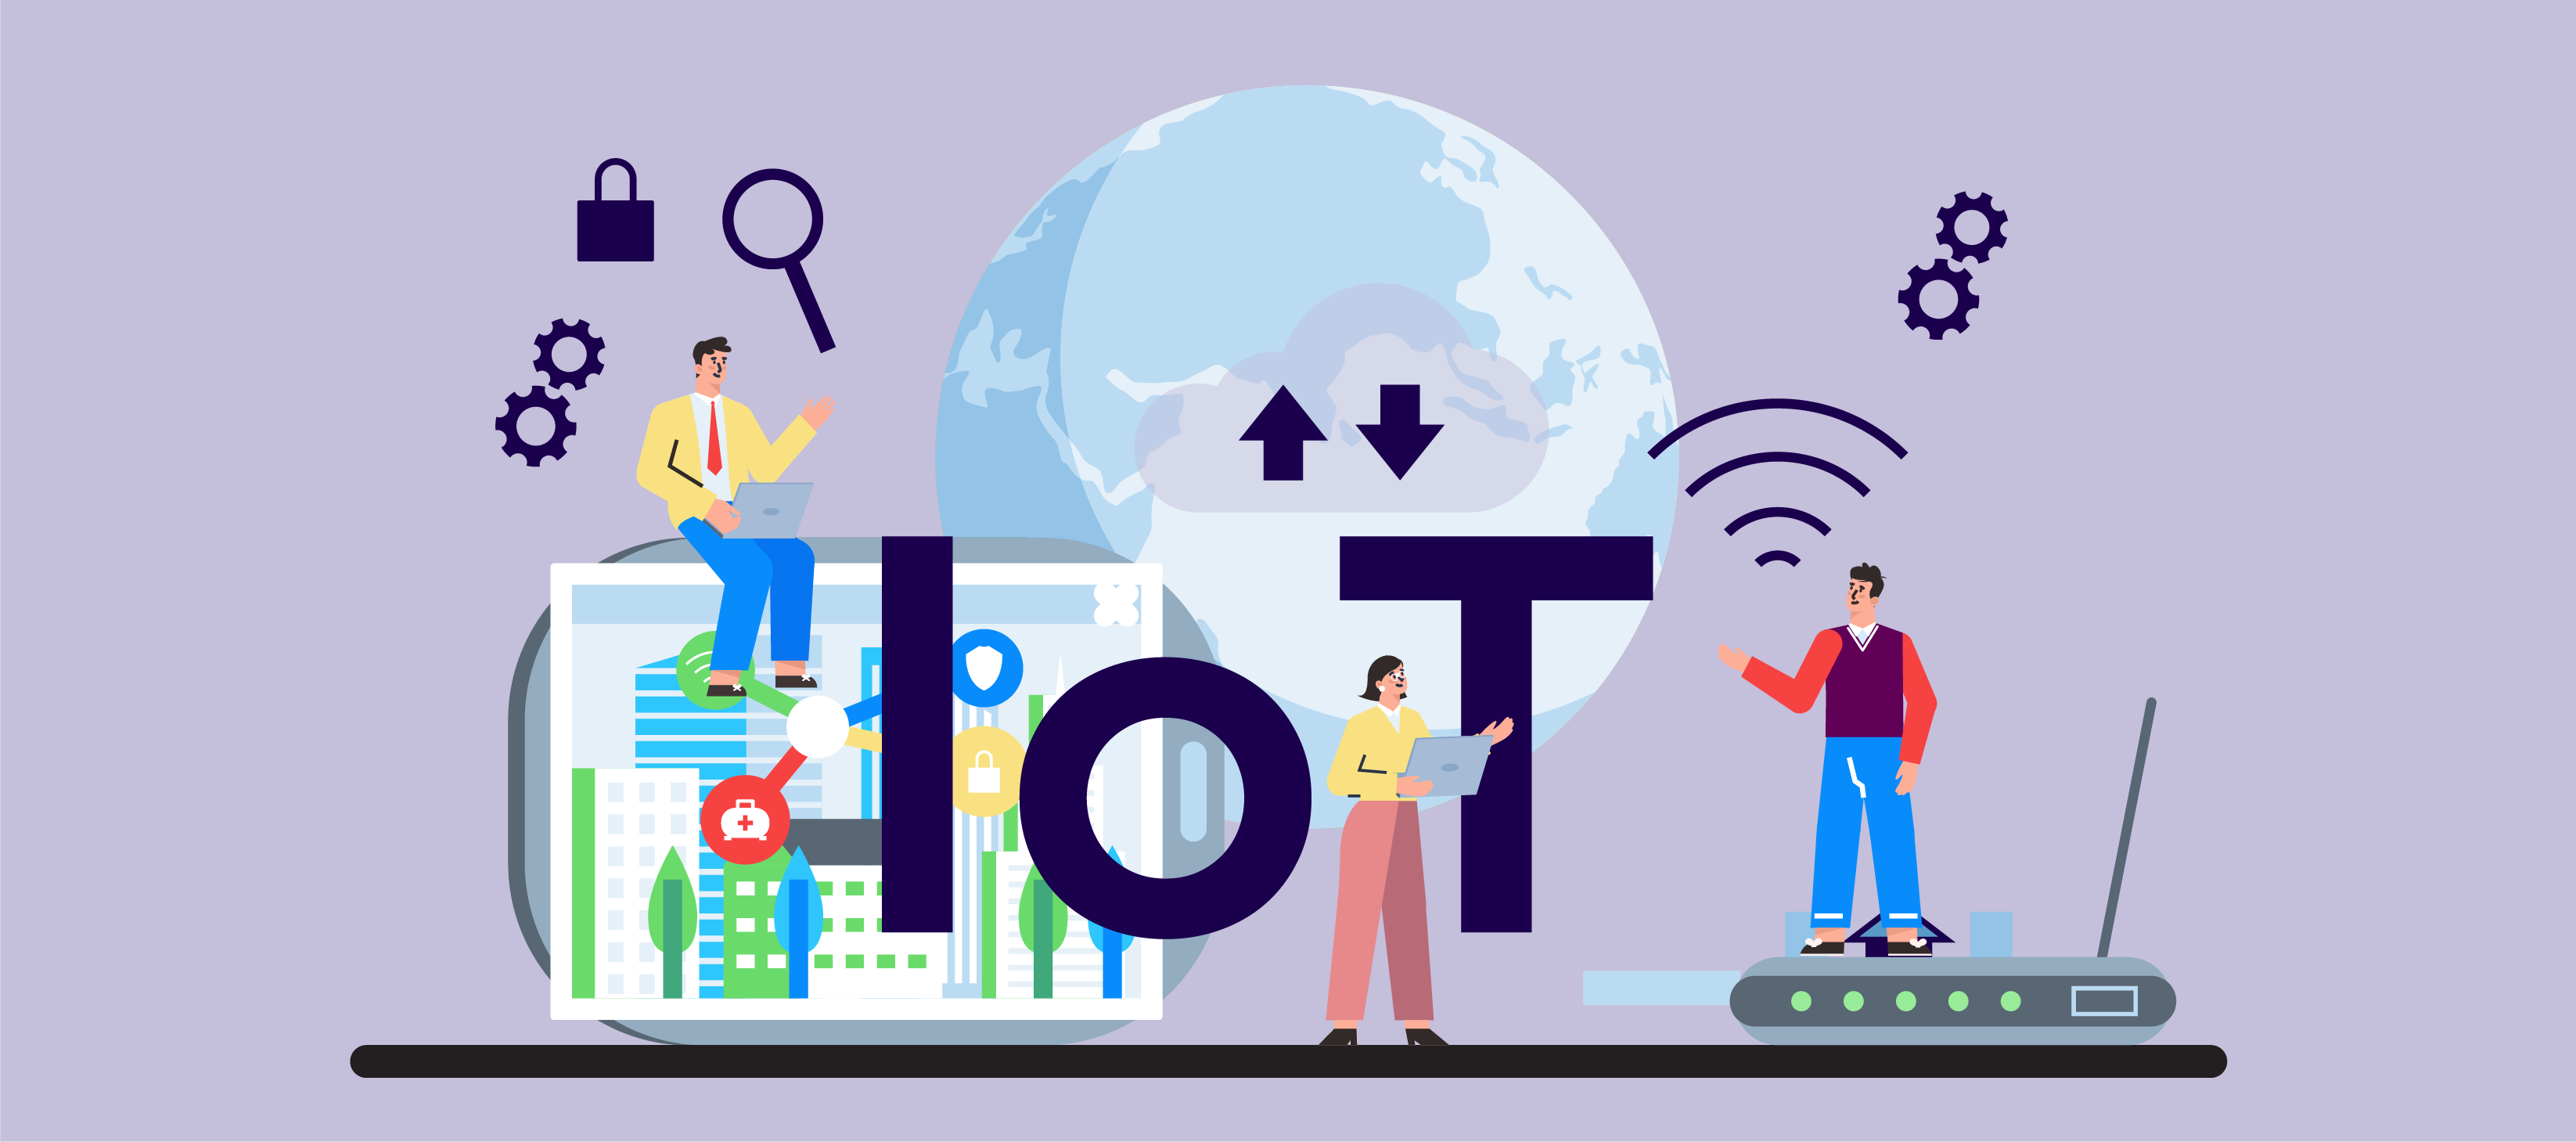 Best 100 IoT Application Examples for Different IoT Industries